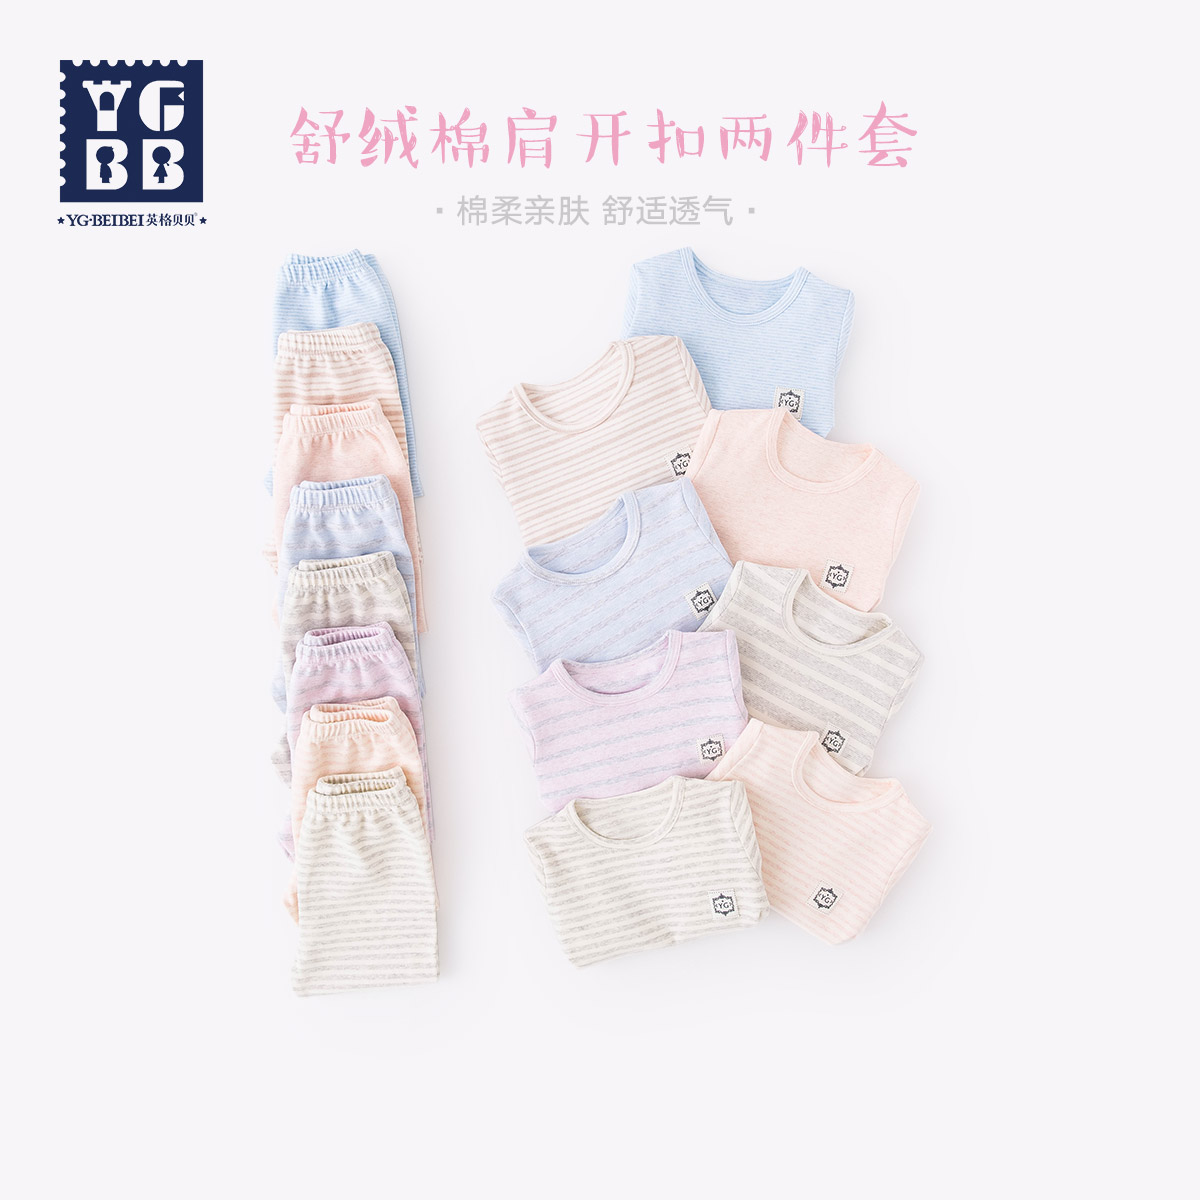 Ingebebe Baby Autumn Clothes Sanitary Pants Long Sleeve Thin sleeping clothes Baby lingerie suit Spring and autumn children Two sets